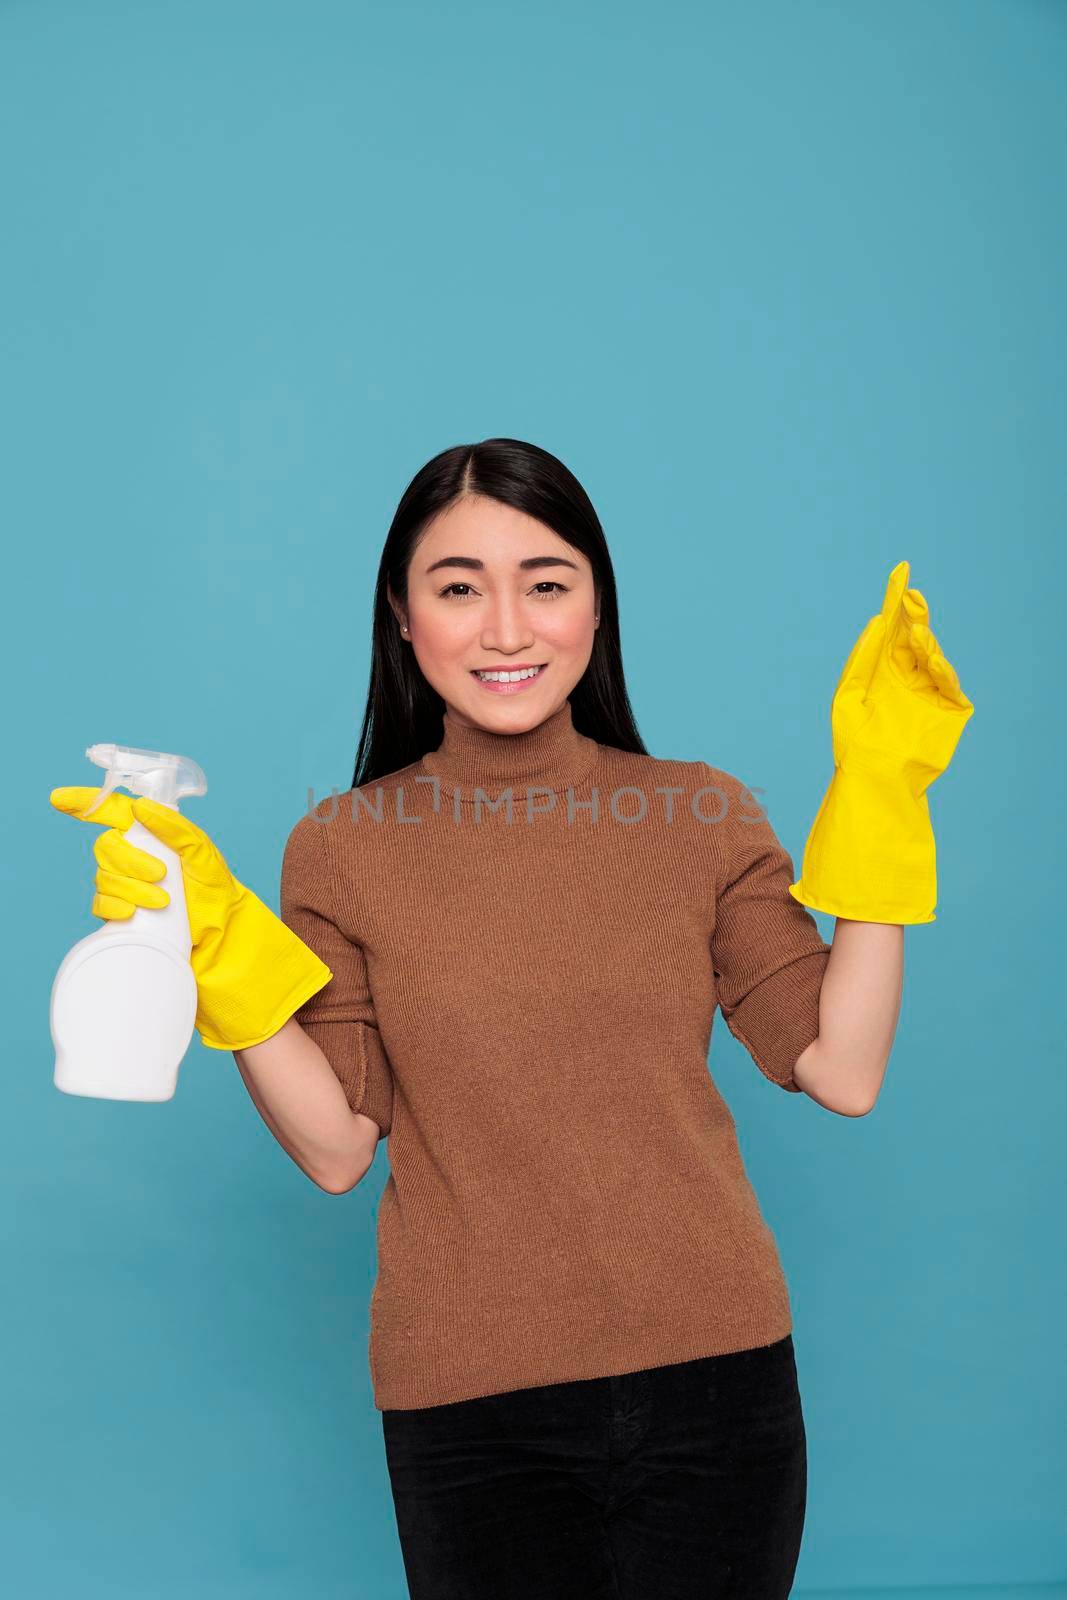 Satisfied smiling asian housemaid holding spray yellow rubber glove isolated on a blue background, Cleaning home concept, Smiling face expression female ready to do household duties